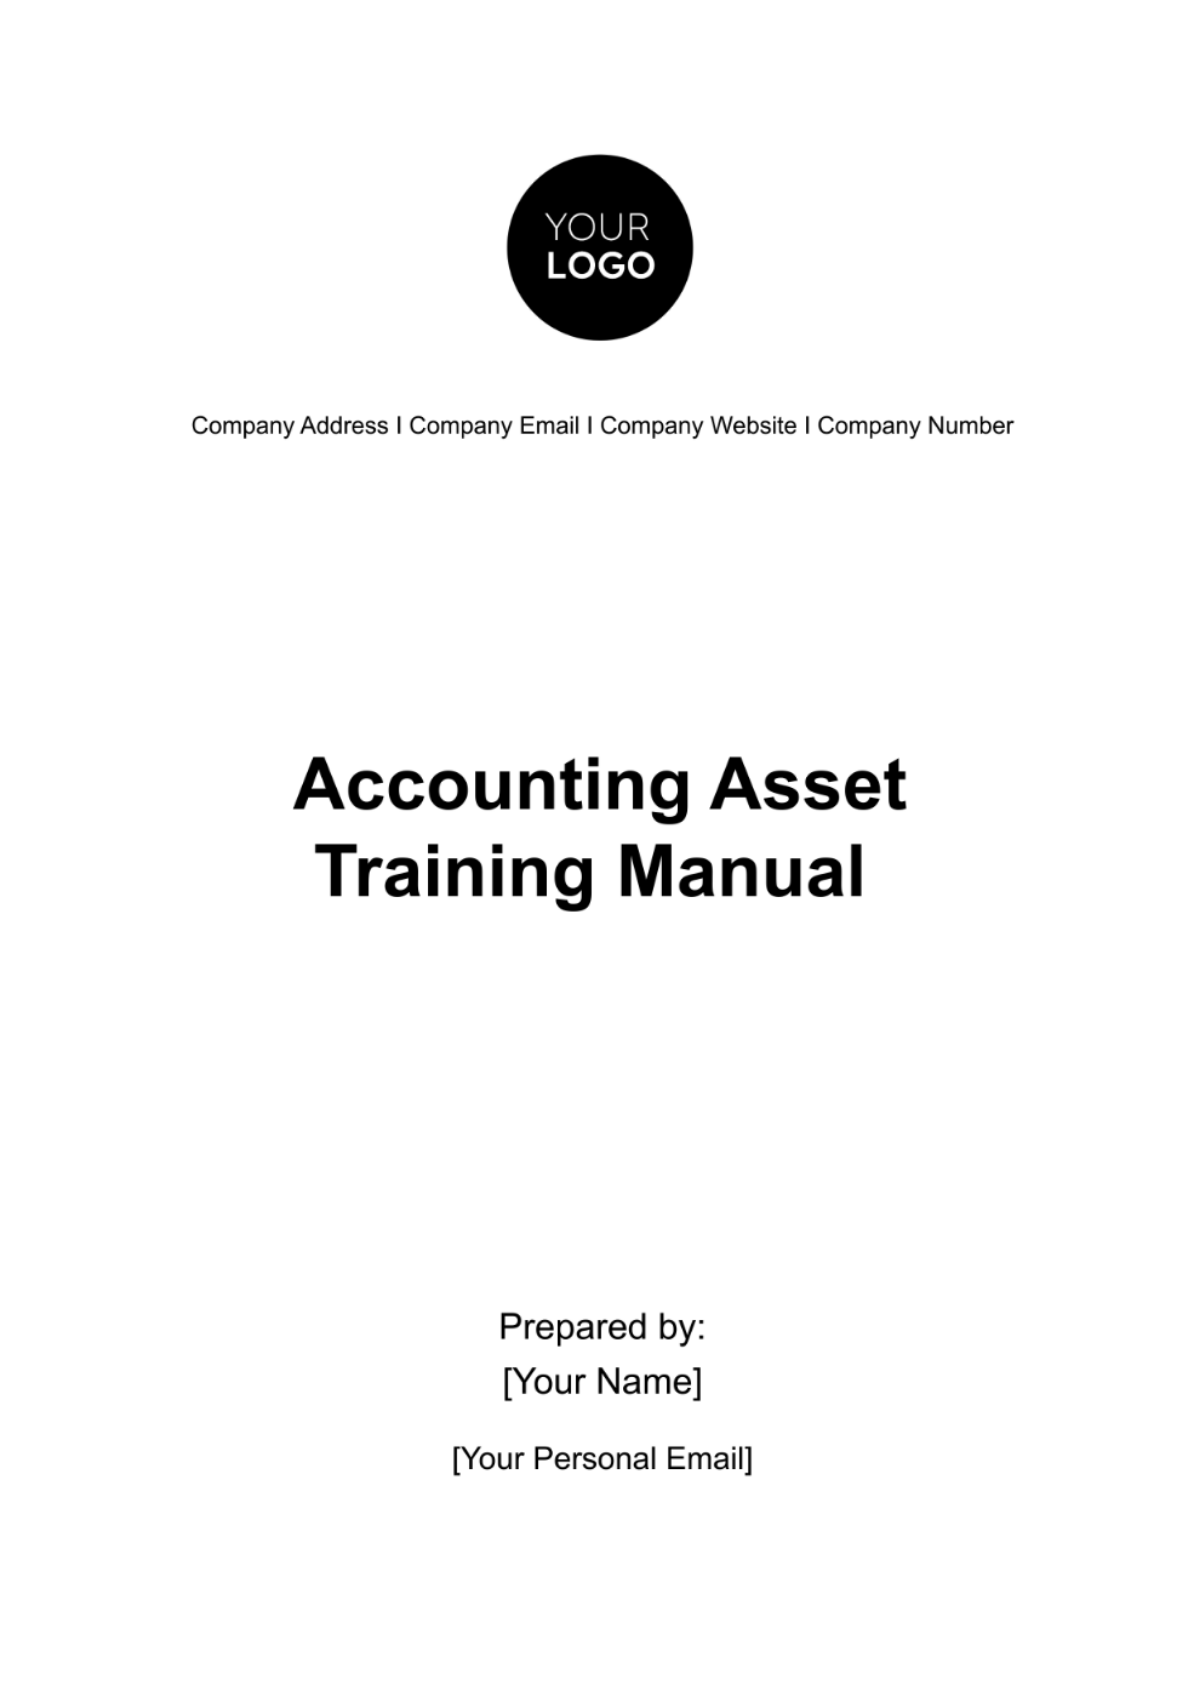 Accounting Asset Training Manual Template